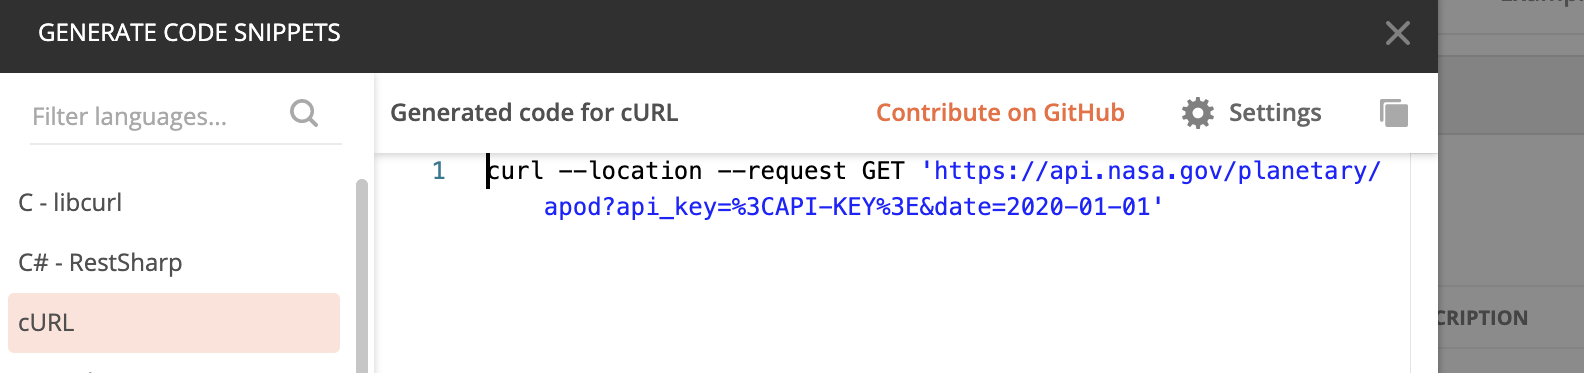 Screen capture showing generated curl command in Postman